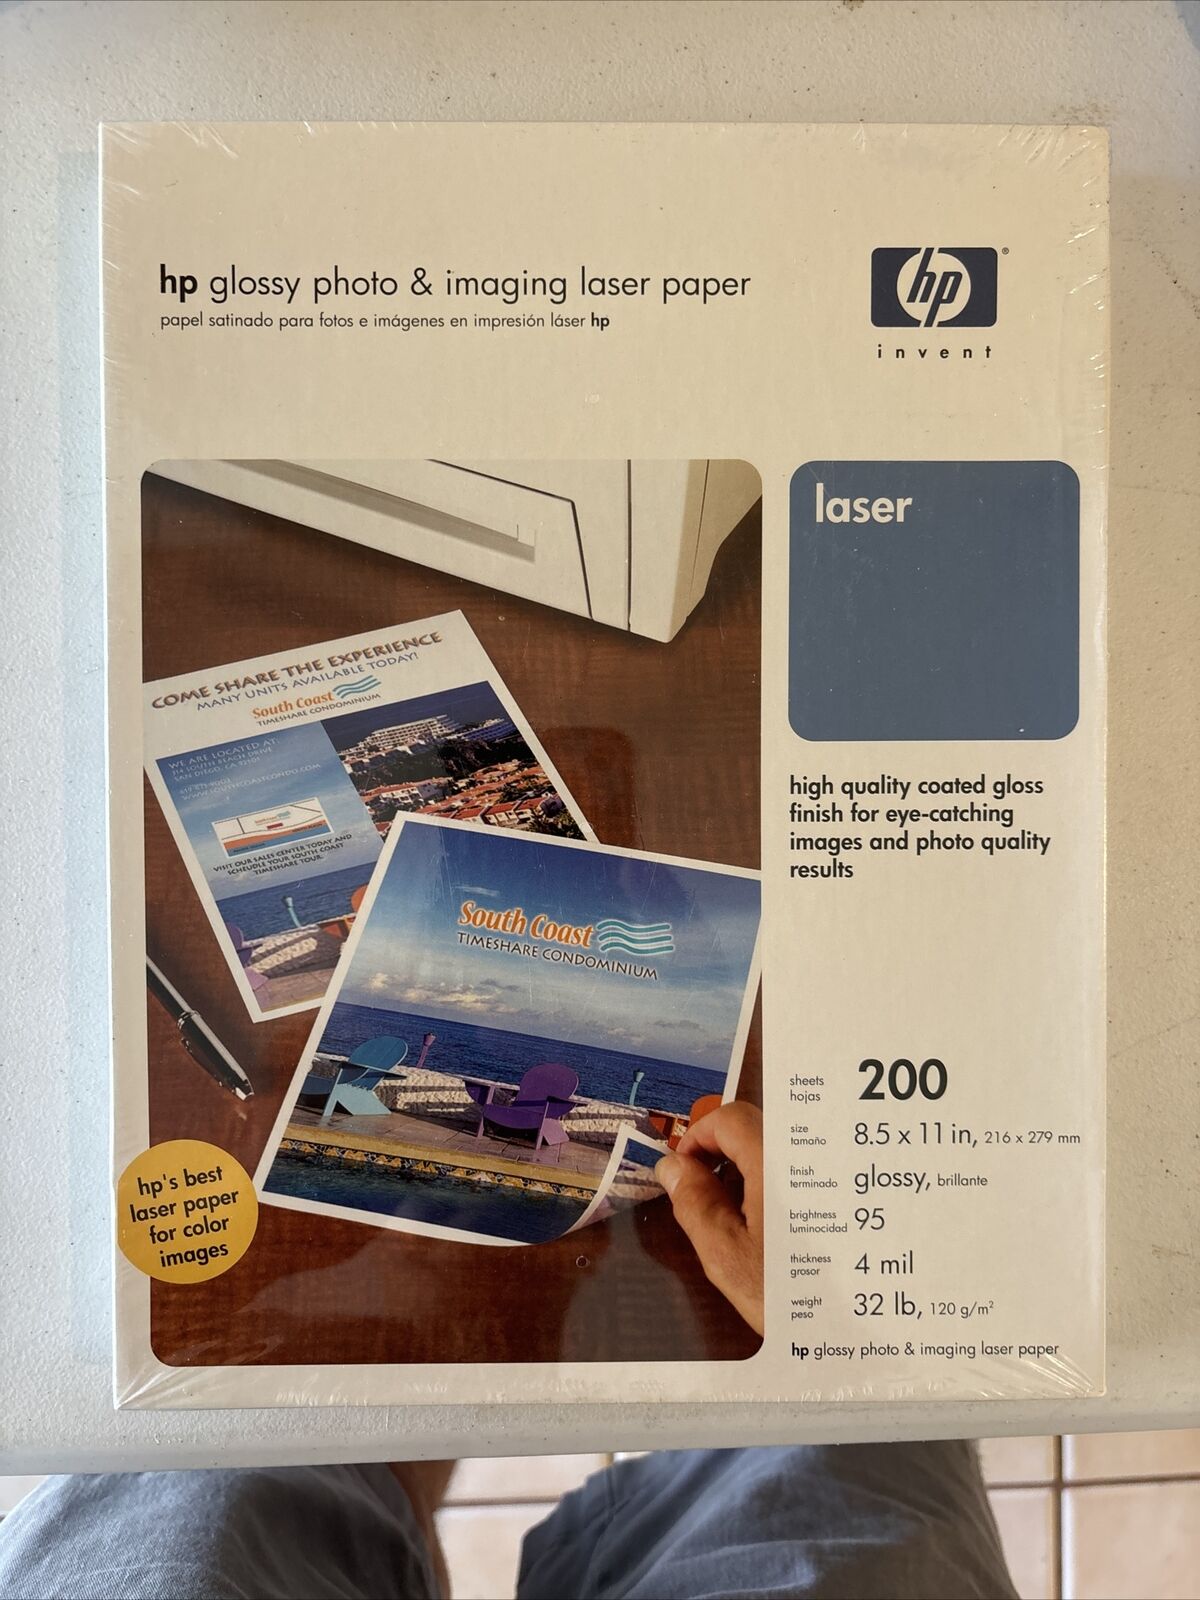 New HP Glossy Photo & Imaging Laser Paper 200 Sheets , 8.5 x 11 , 32 lb , 4 Mil